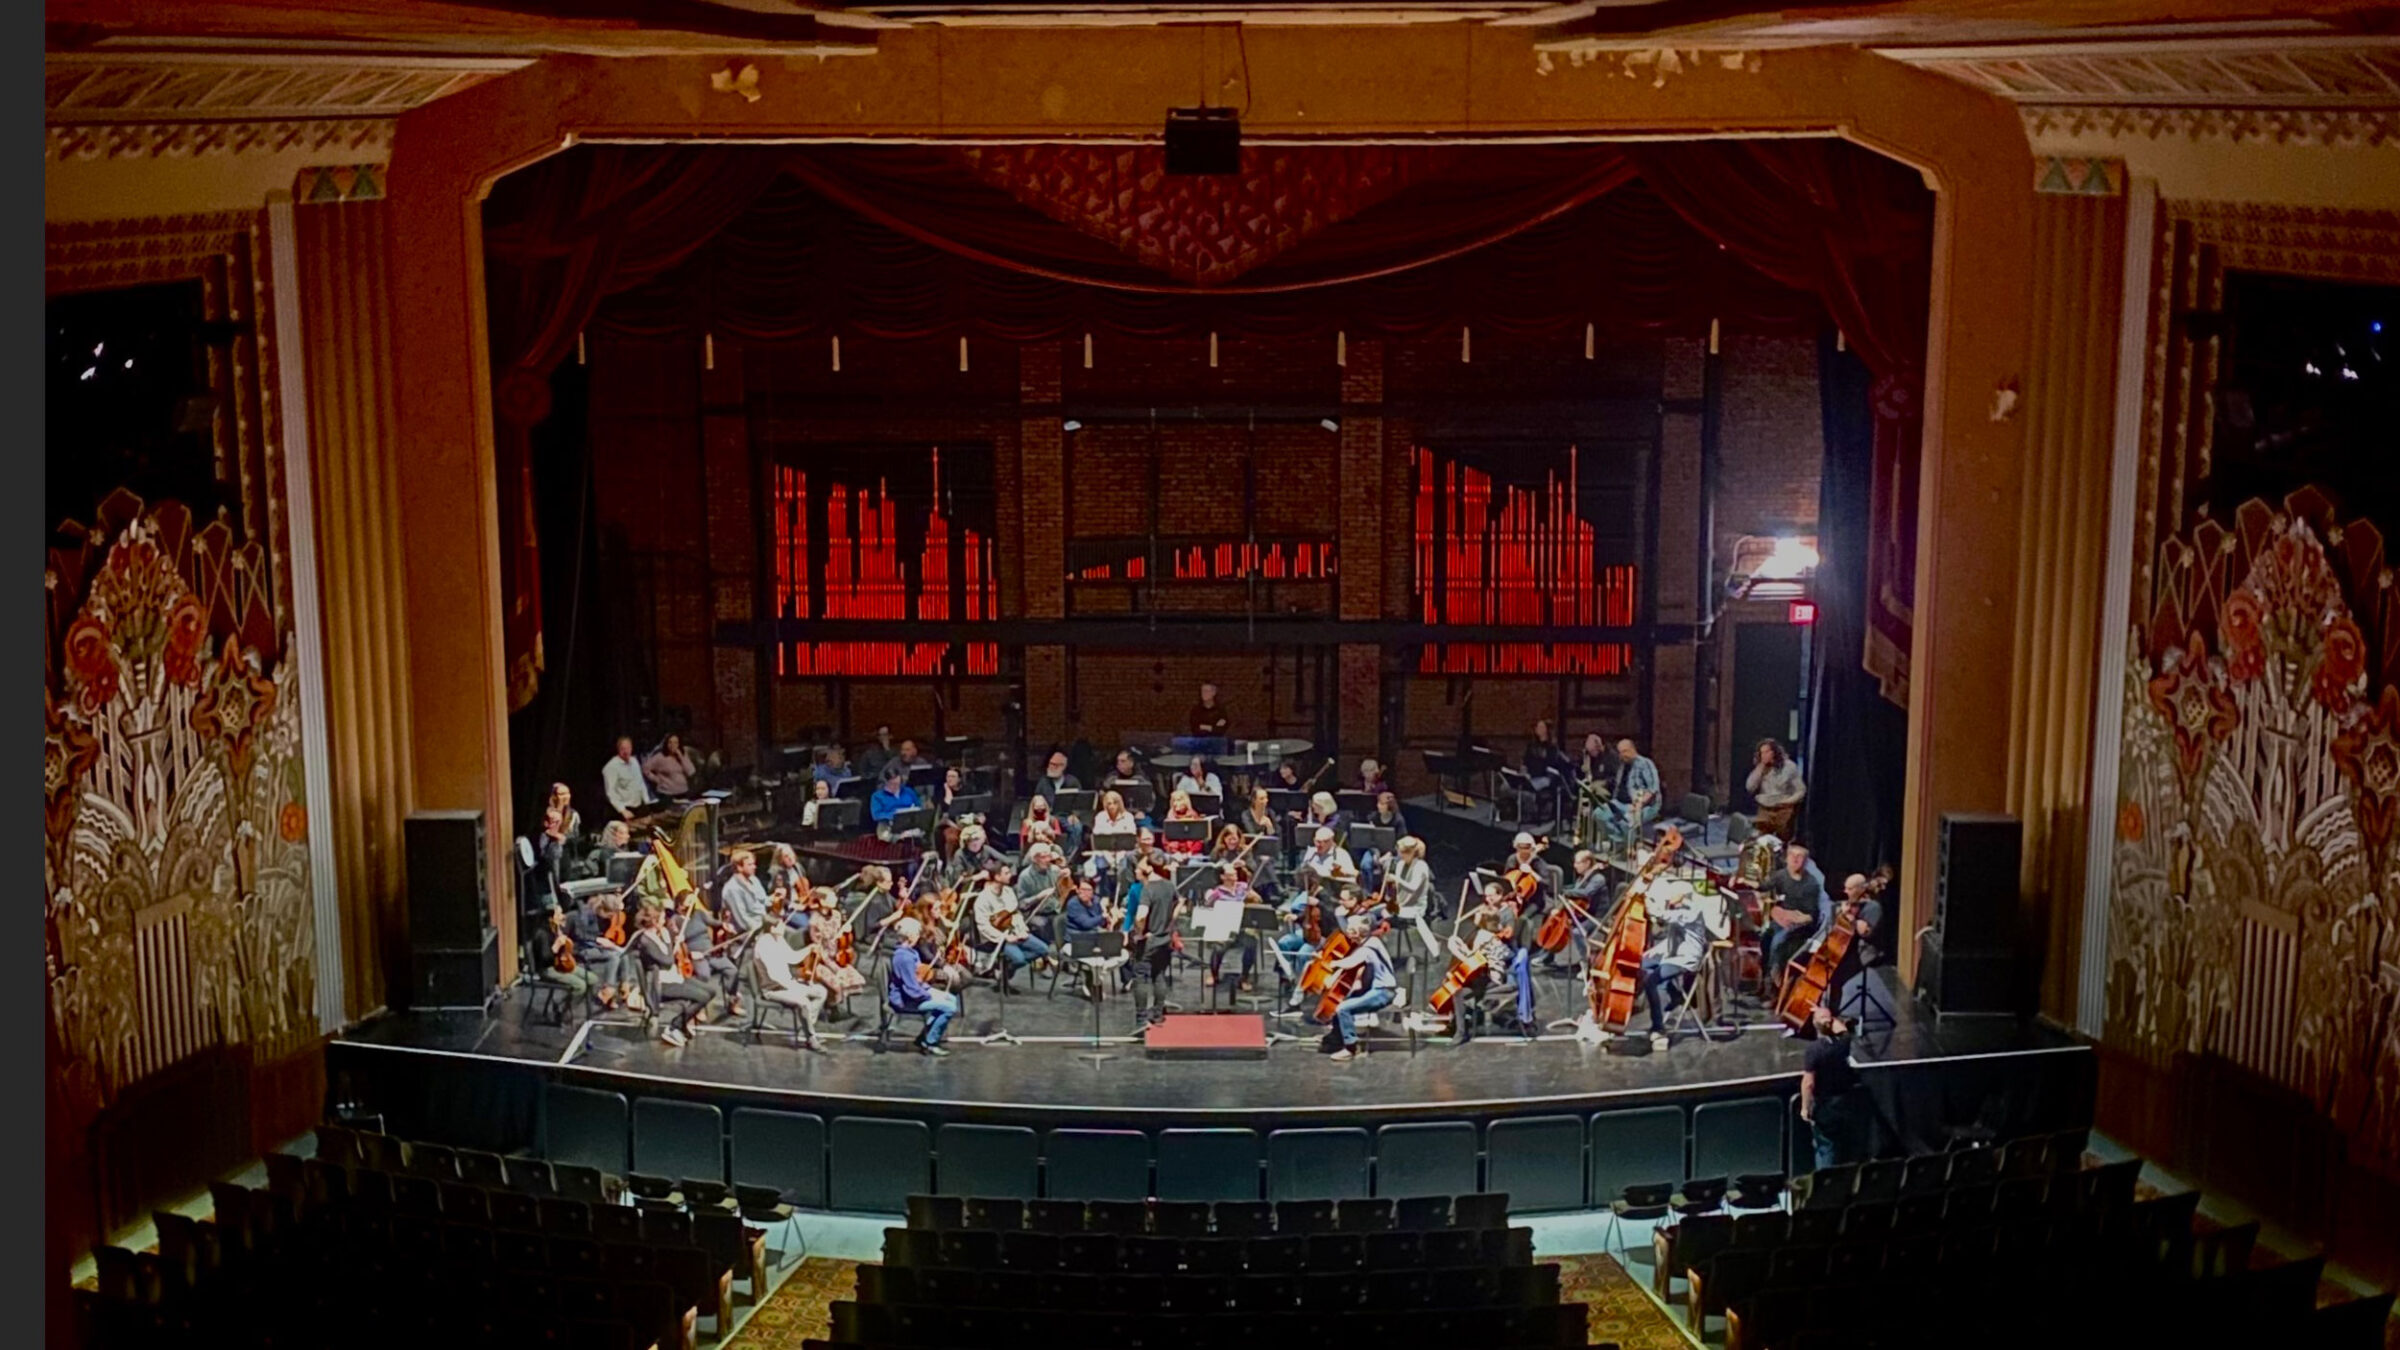 The Vermont Symphony Orchestra plays on stage at the Flynn Theater.